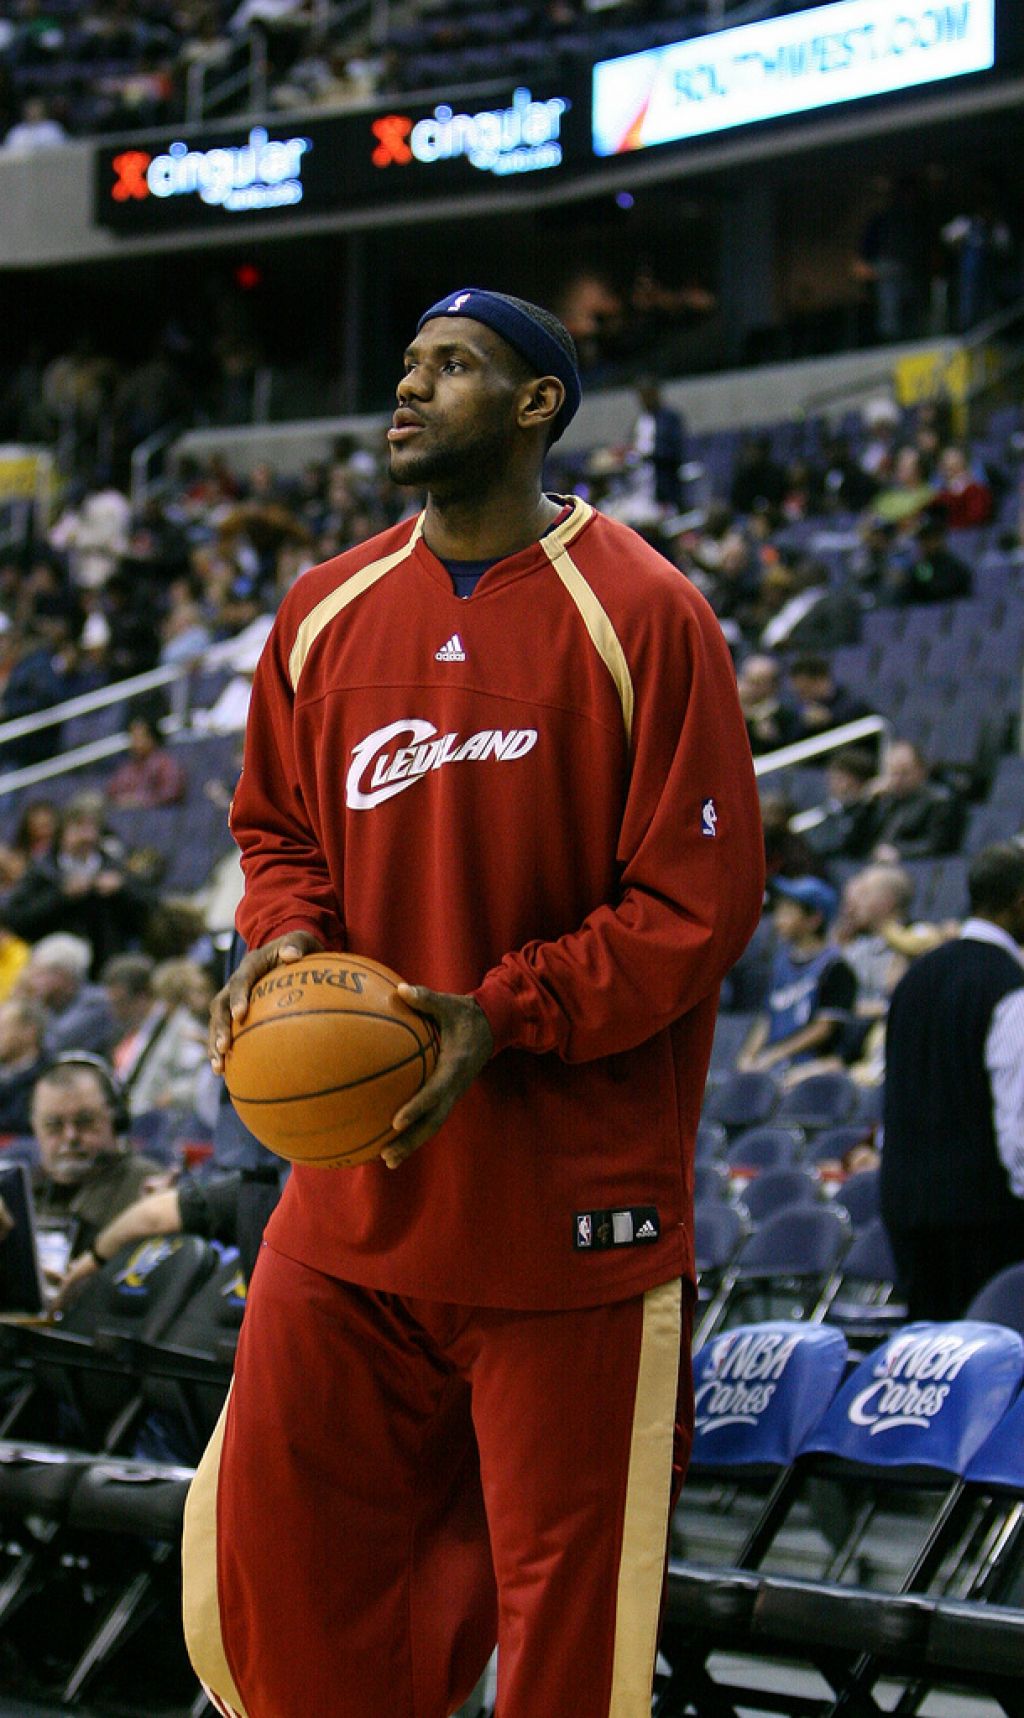 lebron james15 LeBron James   Sportsman of the Year 2012 by Sports Illustrated